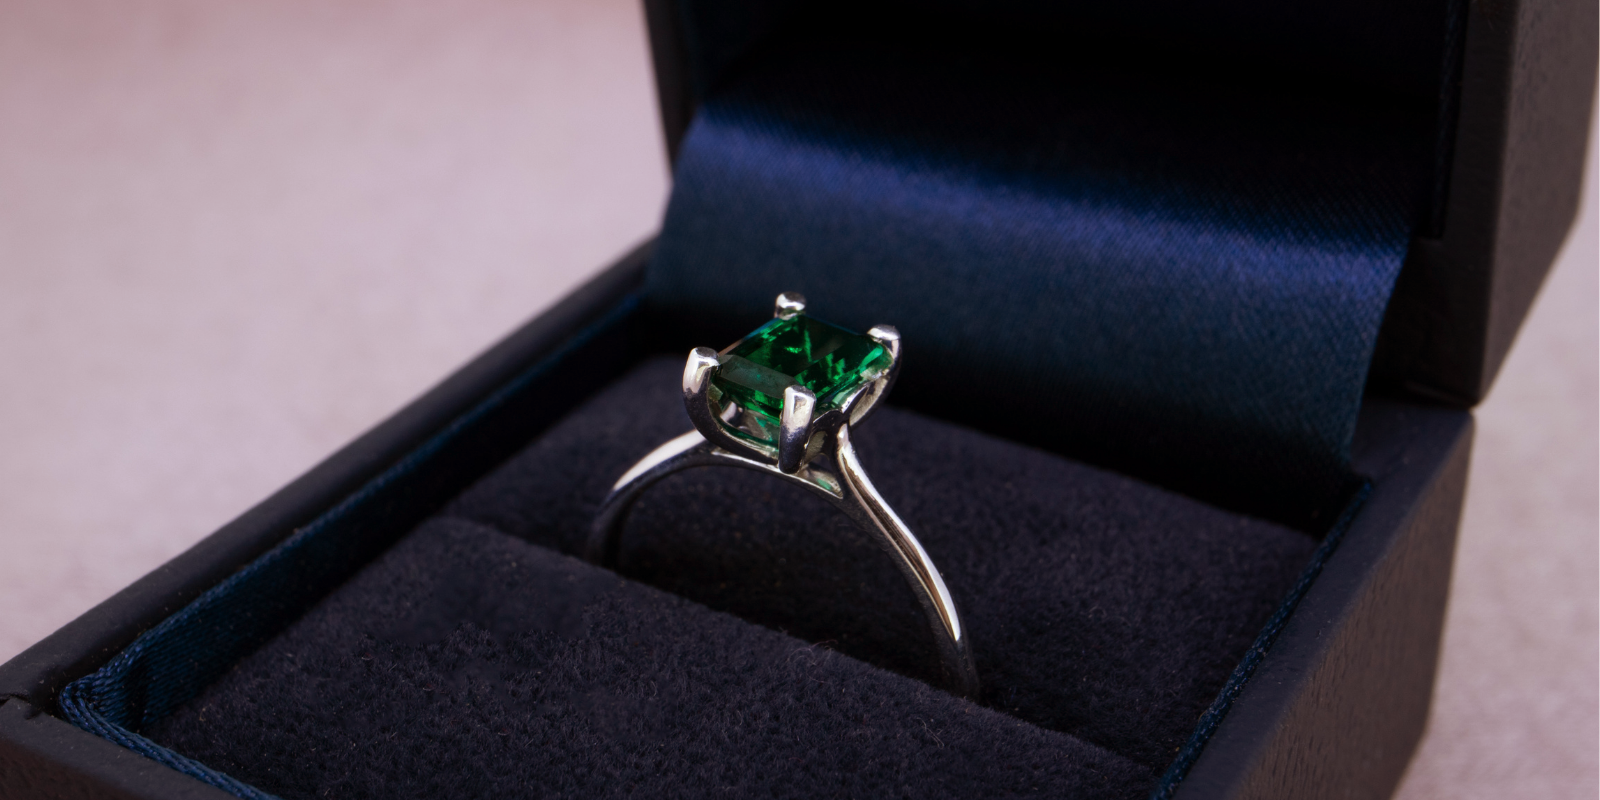 Emerald engagement rings - A full buying guide